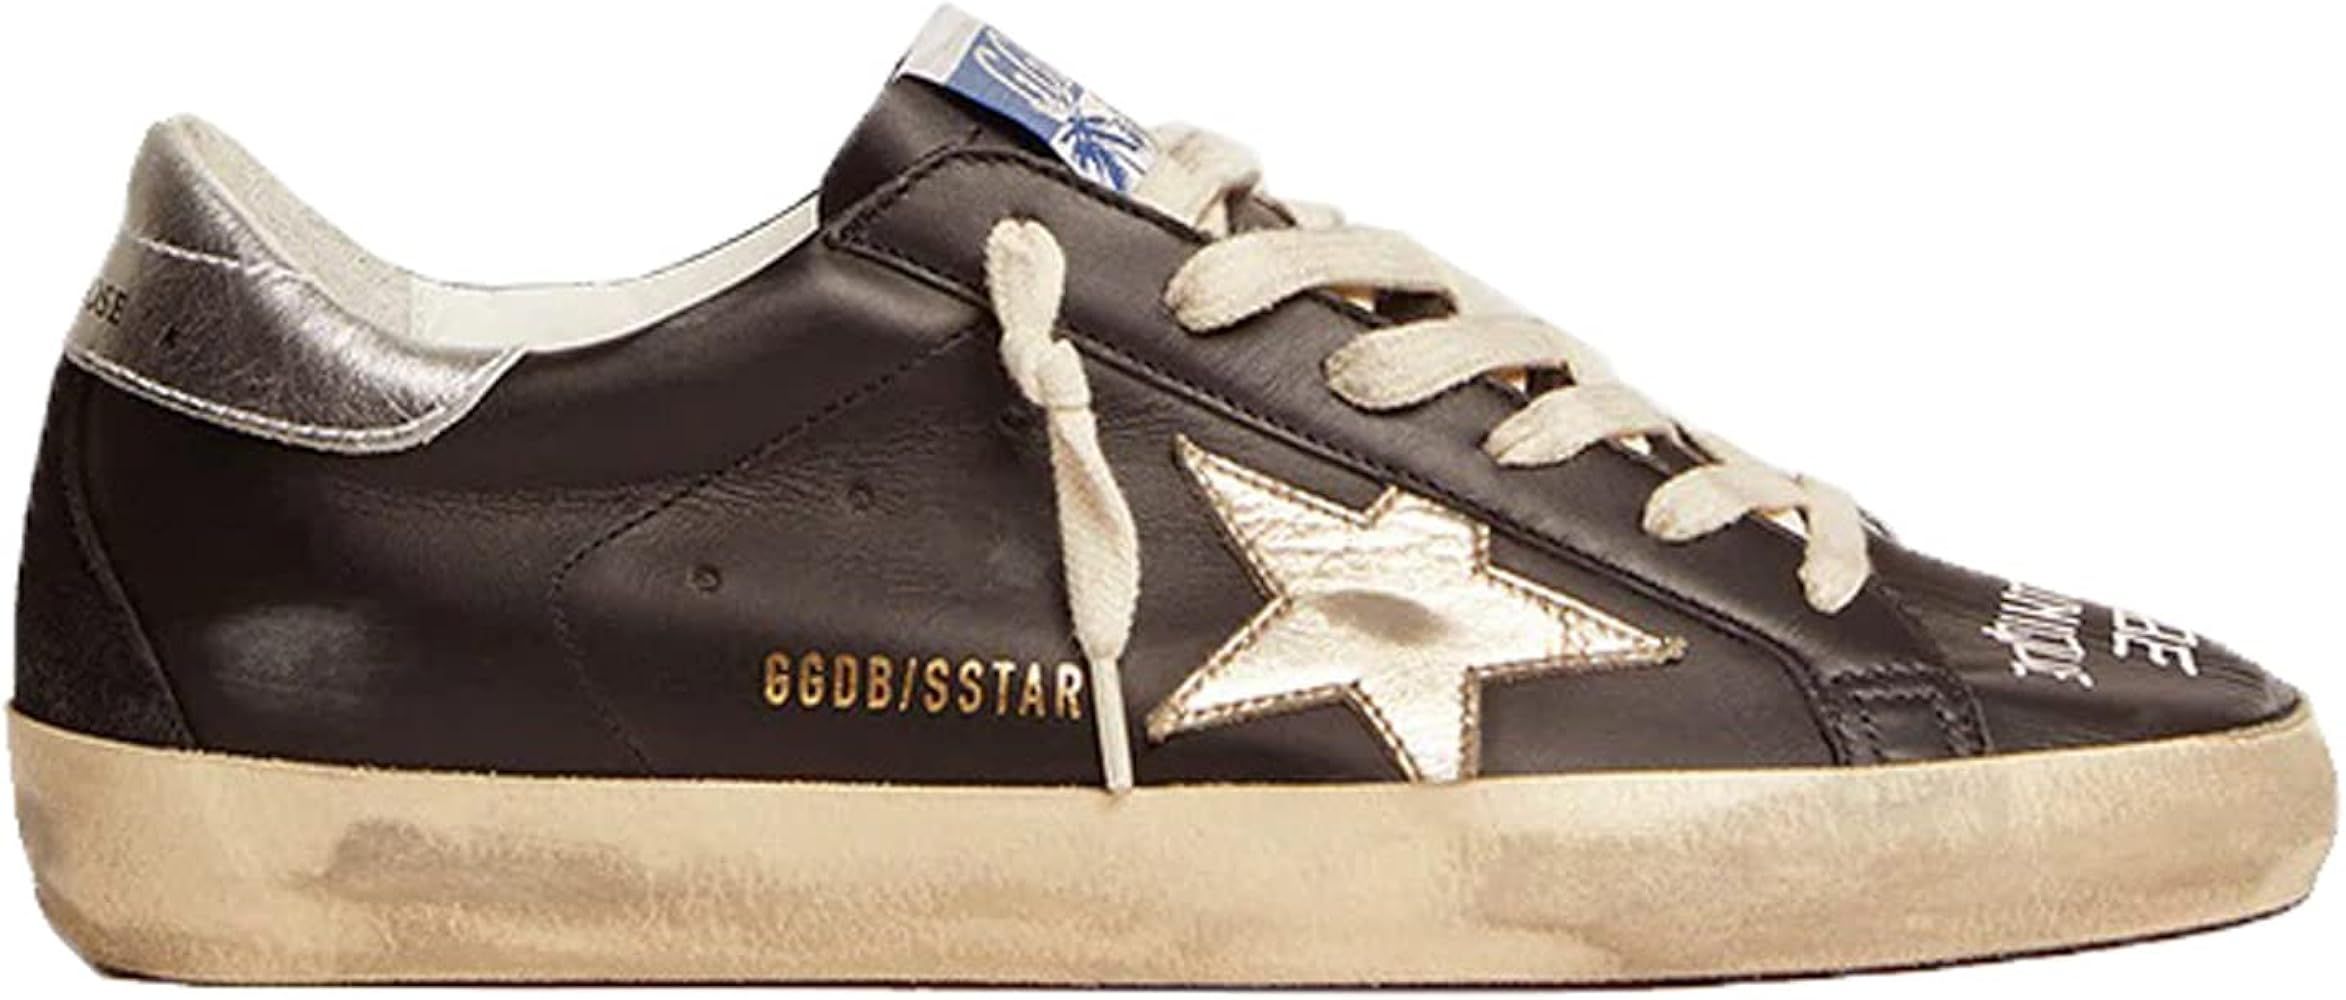 Golden Goose Super-Star Leather Upper Printed Toe Laminated and Heel Suede Spur Womens Sneaker GWF00 | Amazon (US)